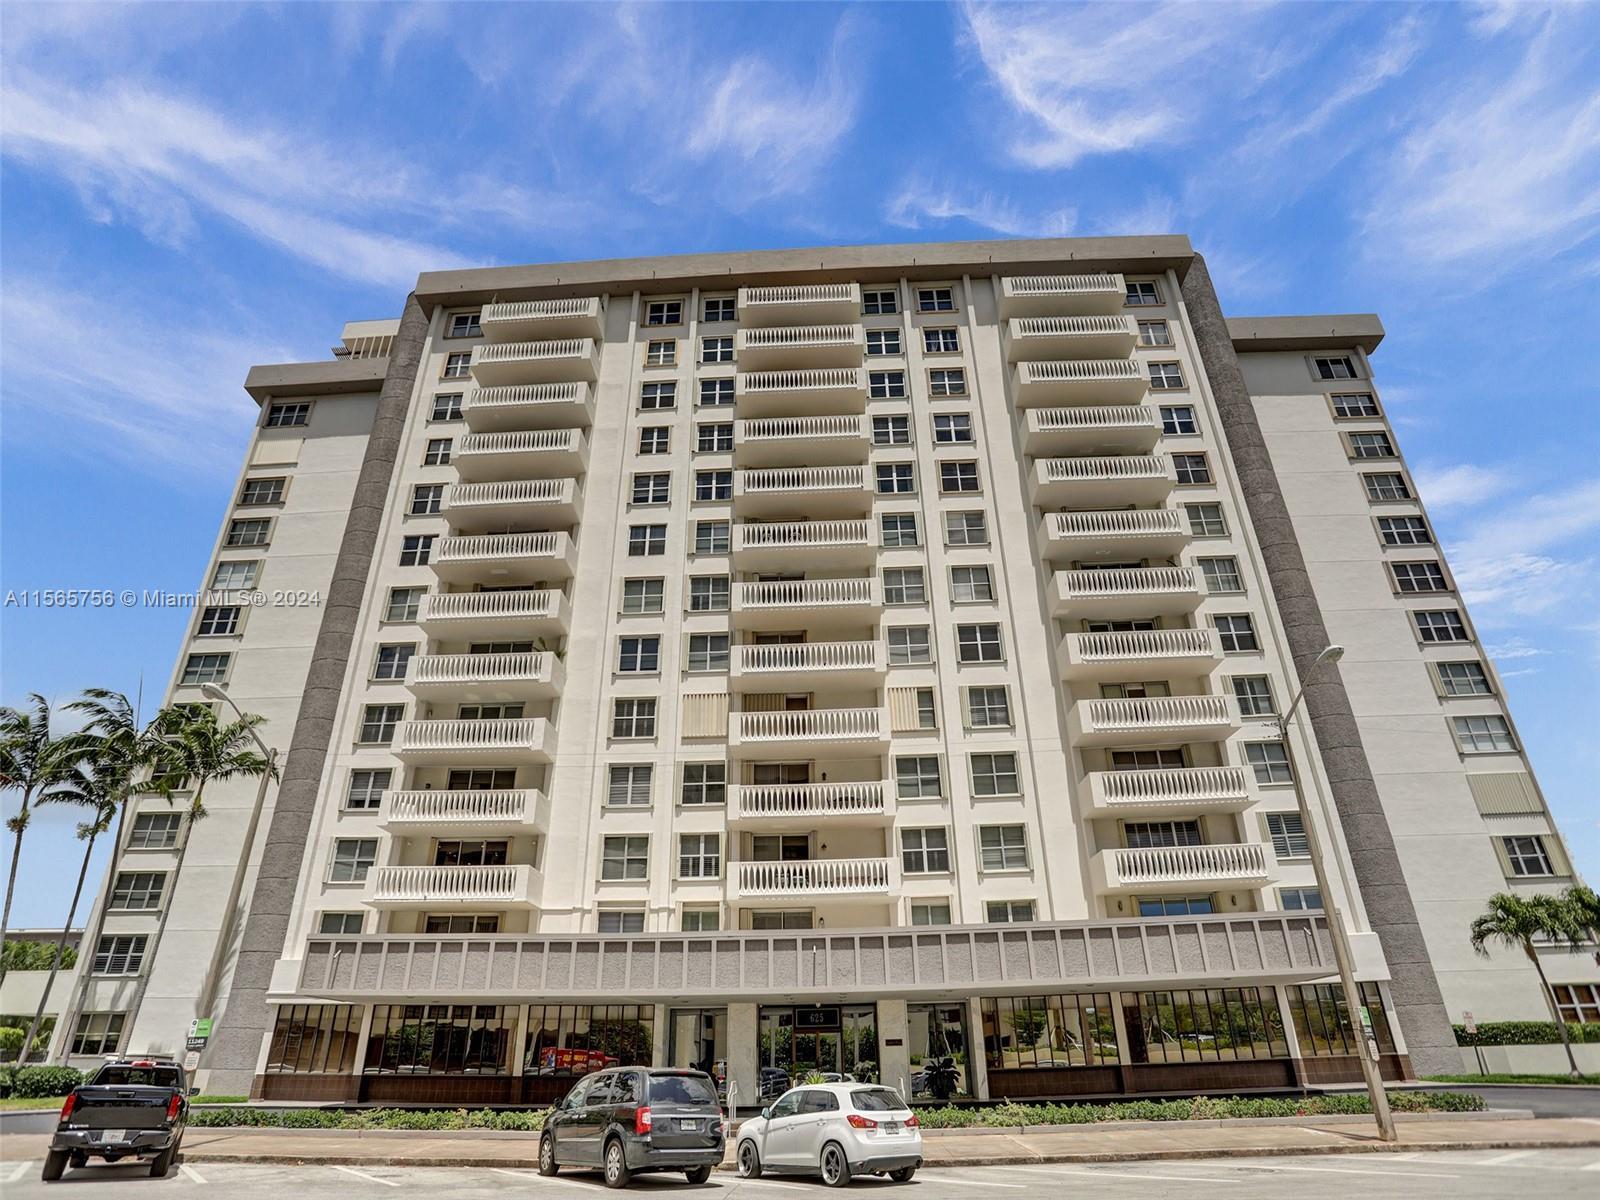 Photo of 625 Biltmore Wy #601 in Coral Gables, FL